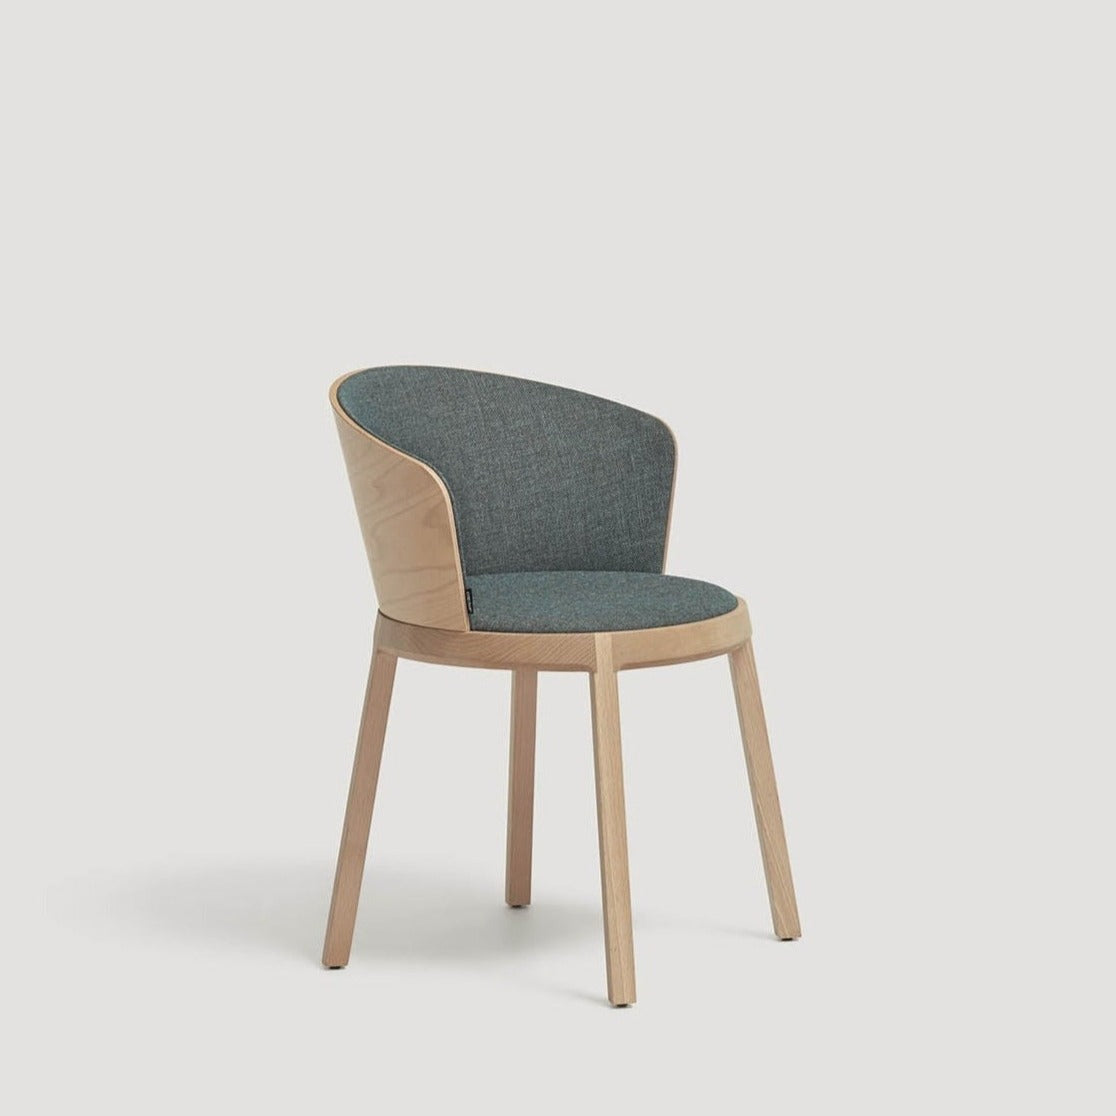 SILLA ARO Chair side view natural base